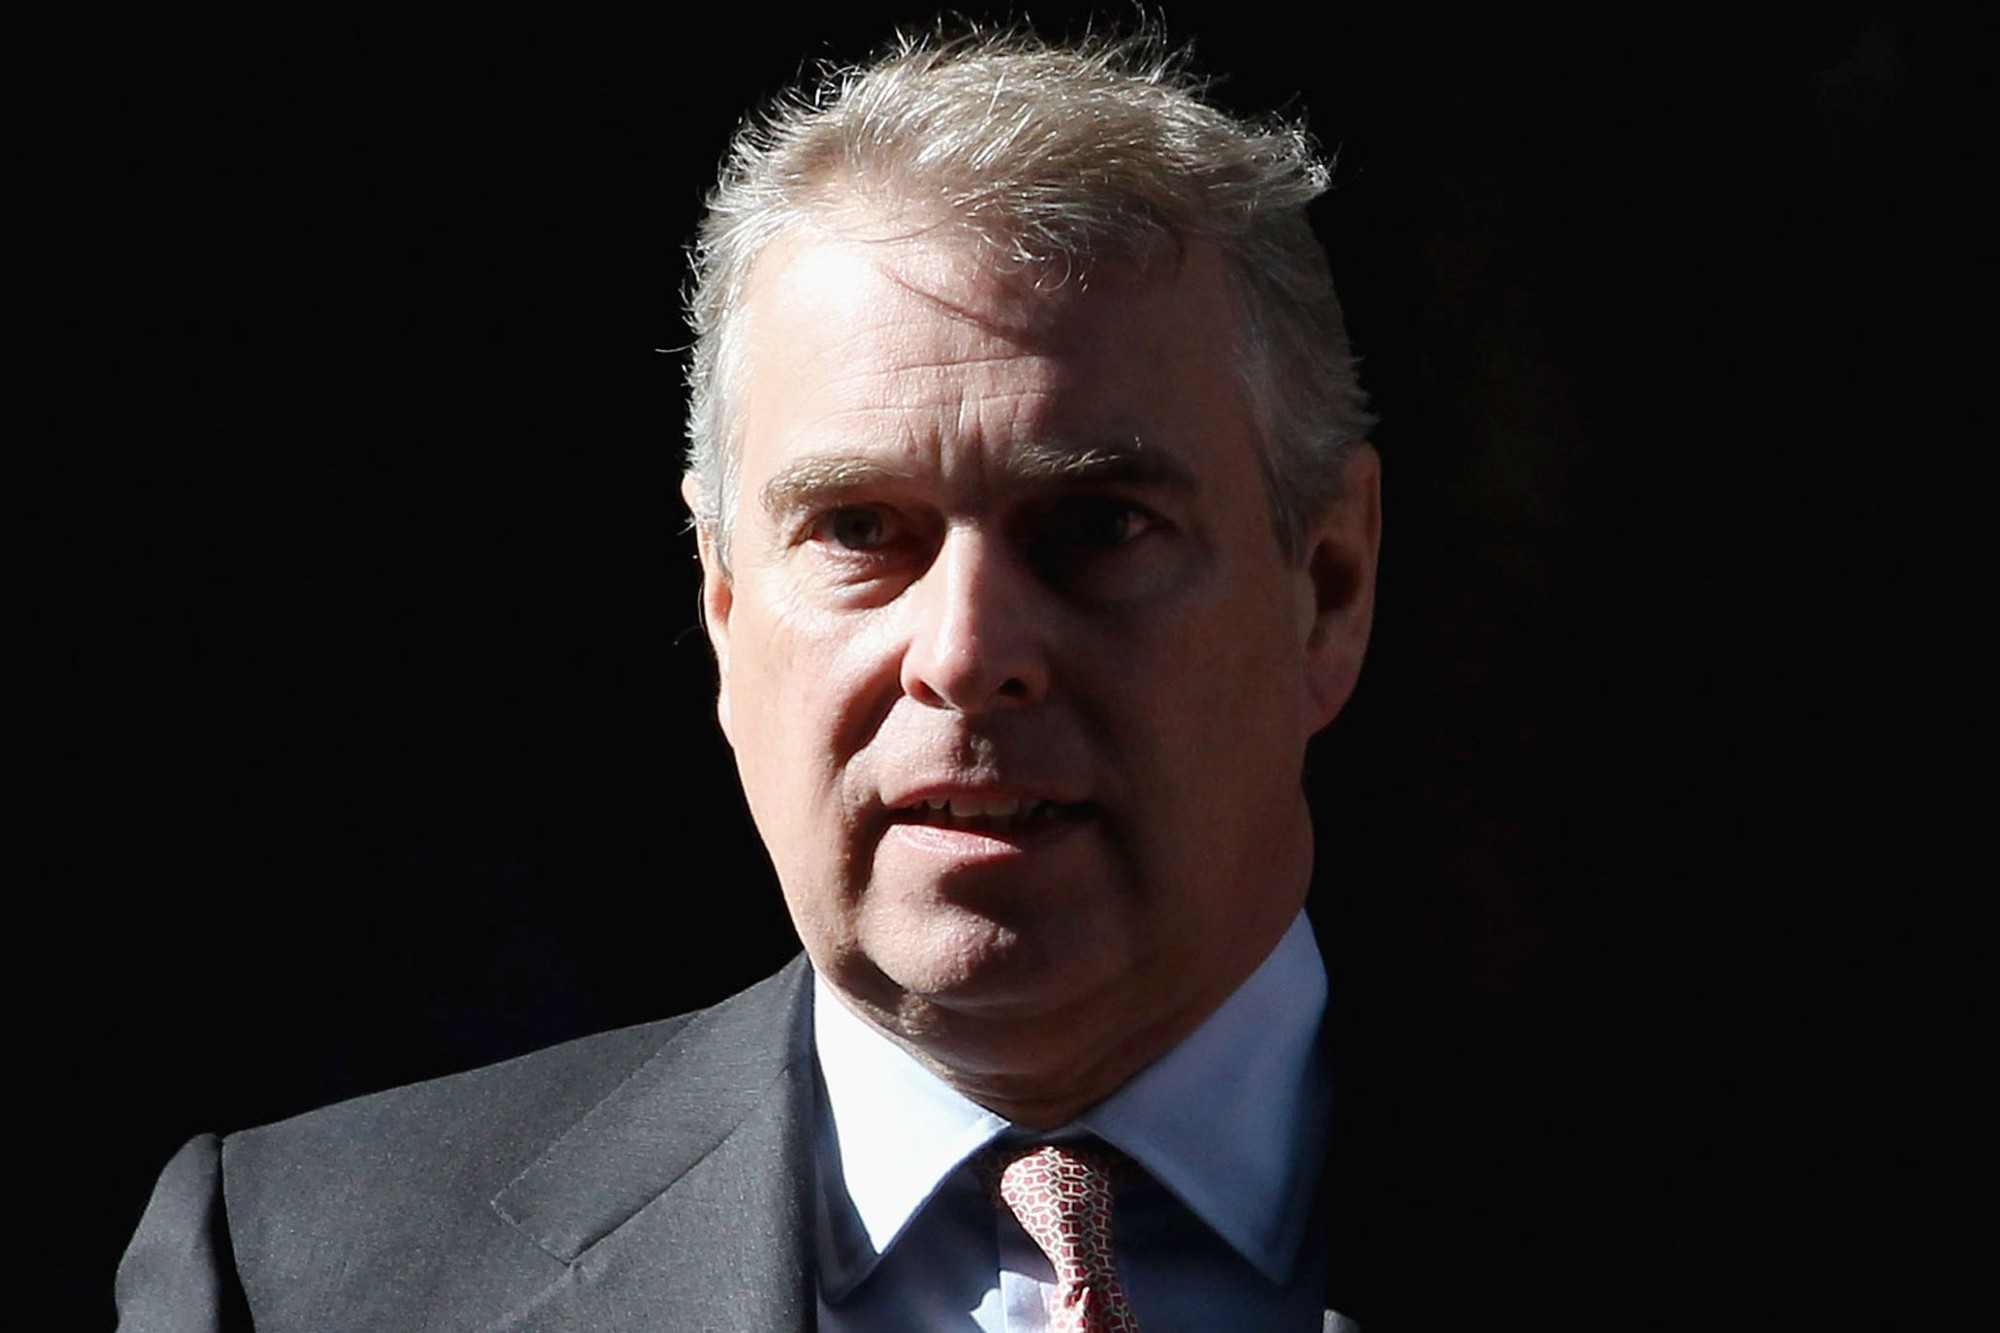 Crowning crime connoisseurs, Netflix is about to spill tea on Prince Andrew’s royal scandal. Will the Duke waltz his way out, or will this explosive docu-drama lead to handcuffs?